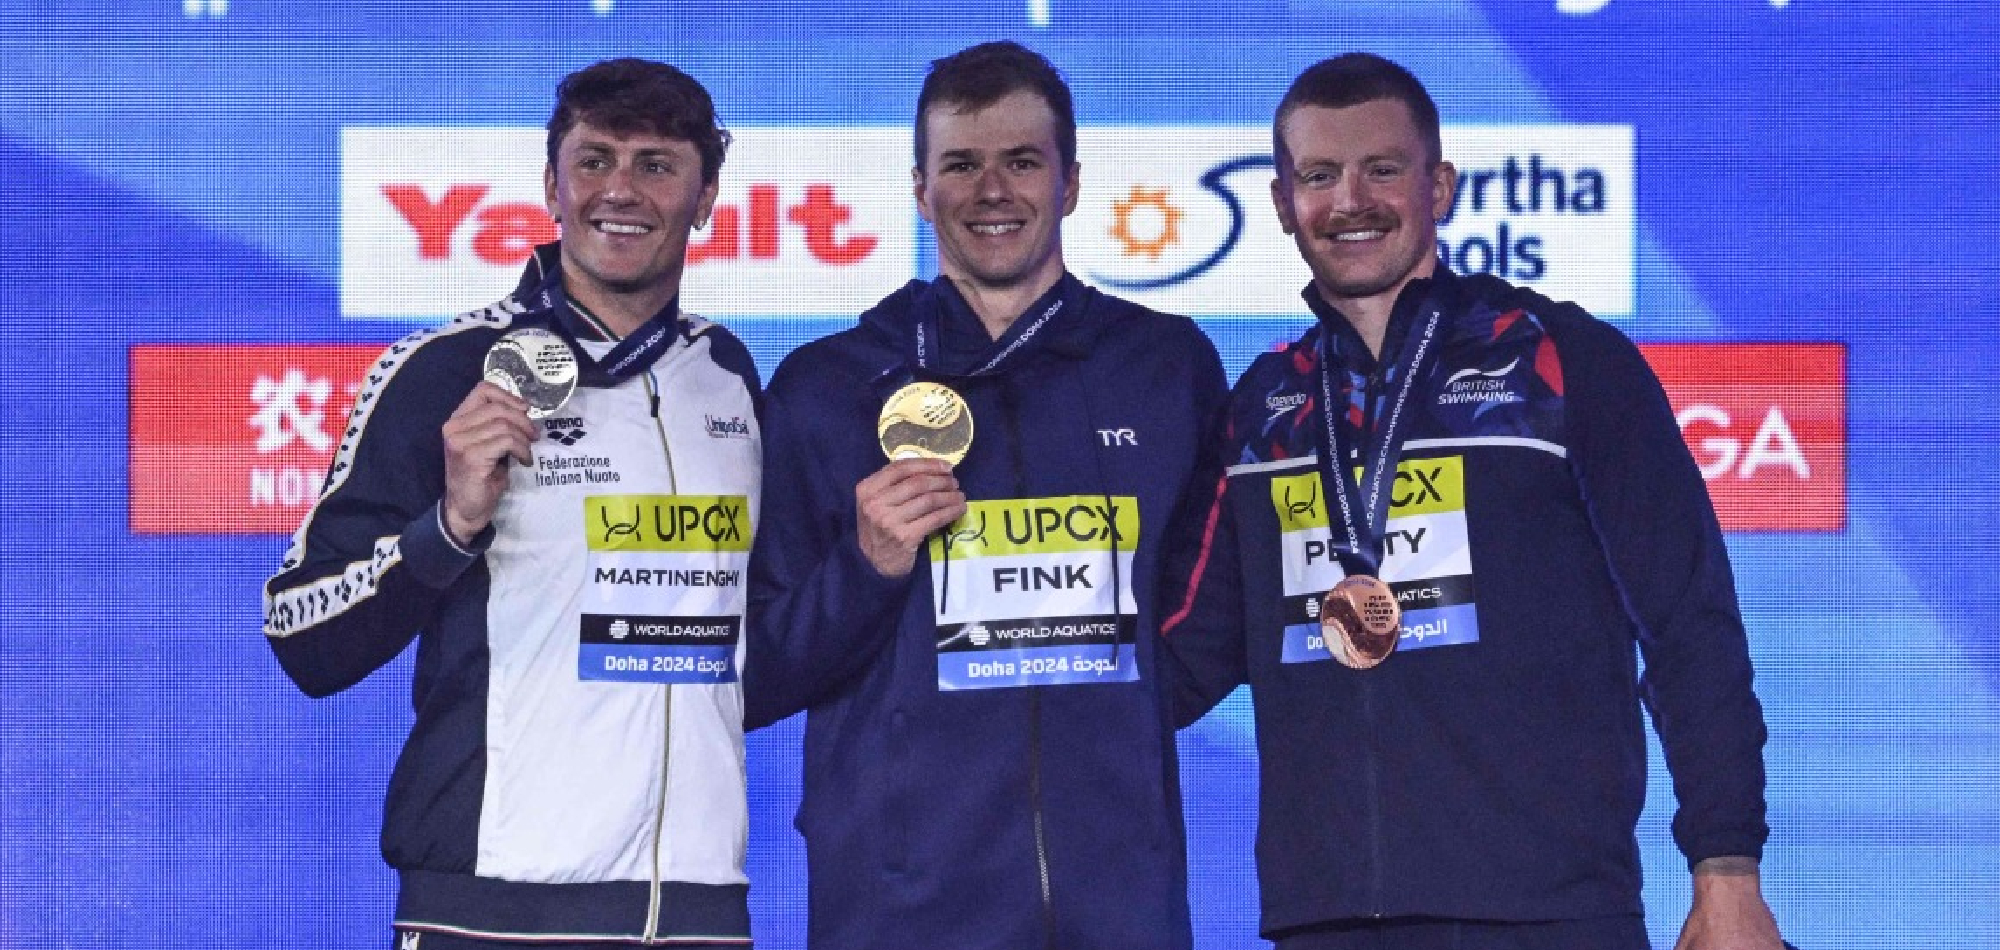 Fink clinches 100m breaststroke win as Peaty takes bronze at Doha 2024